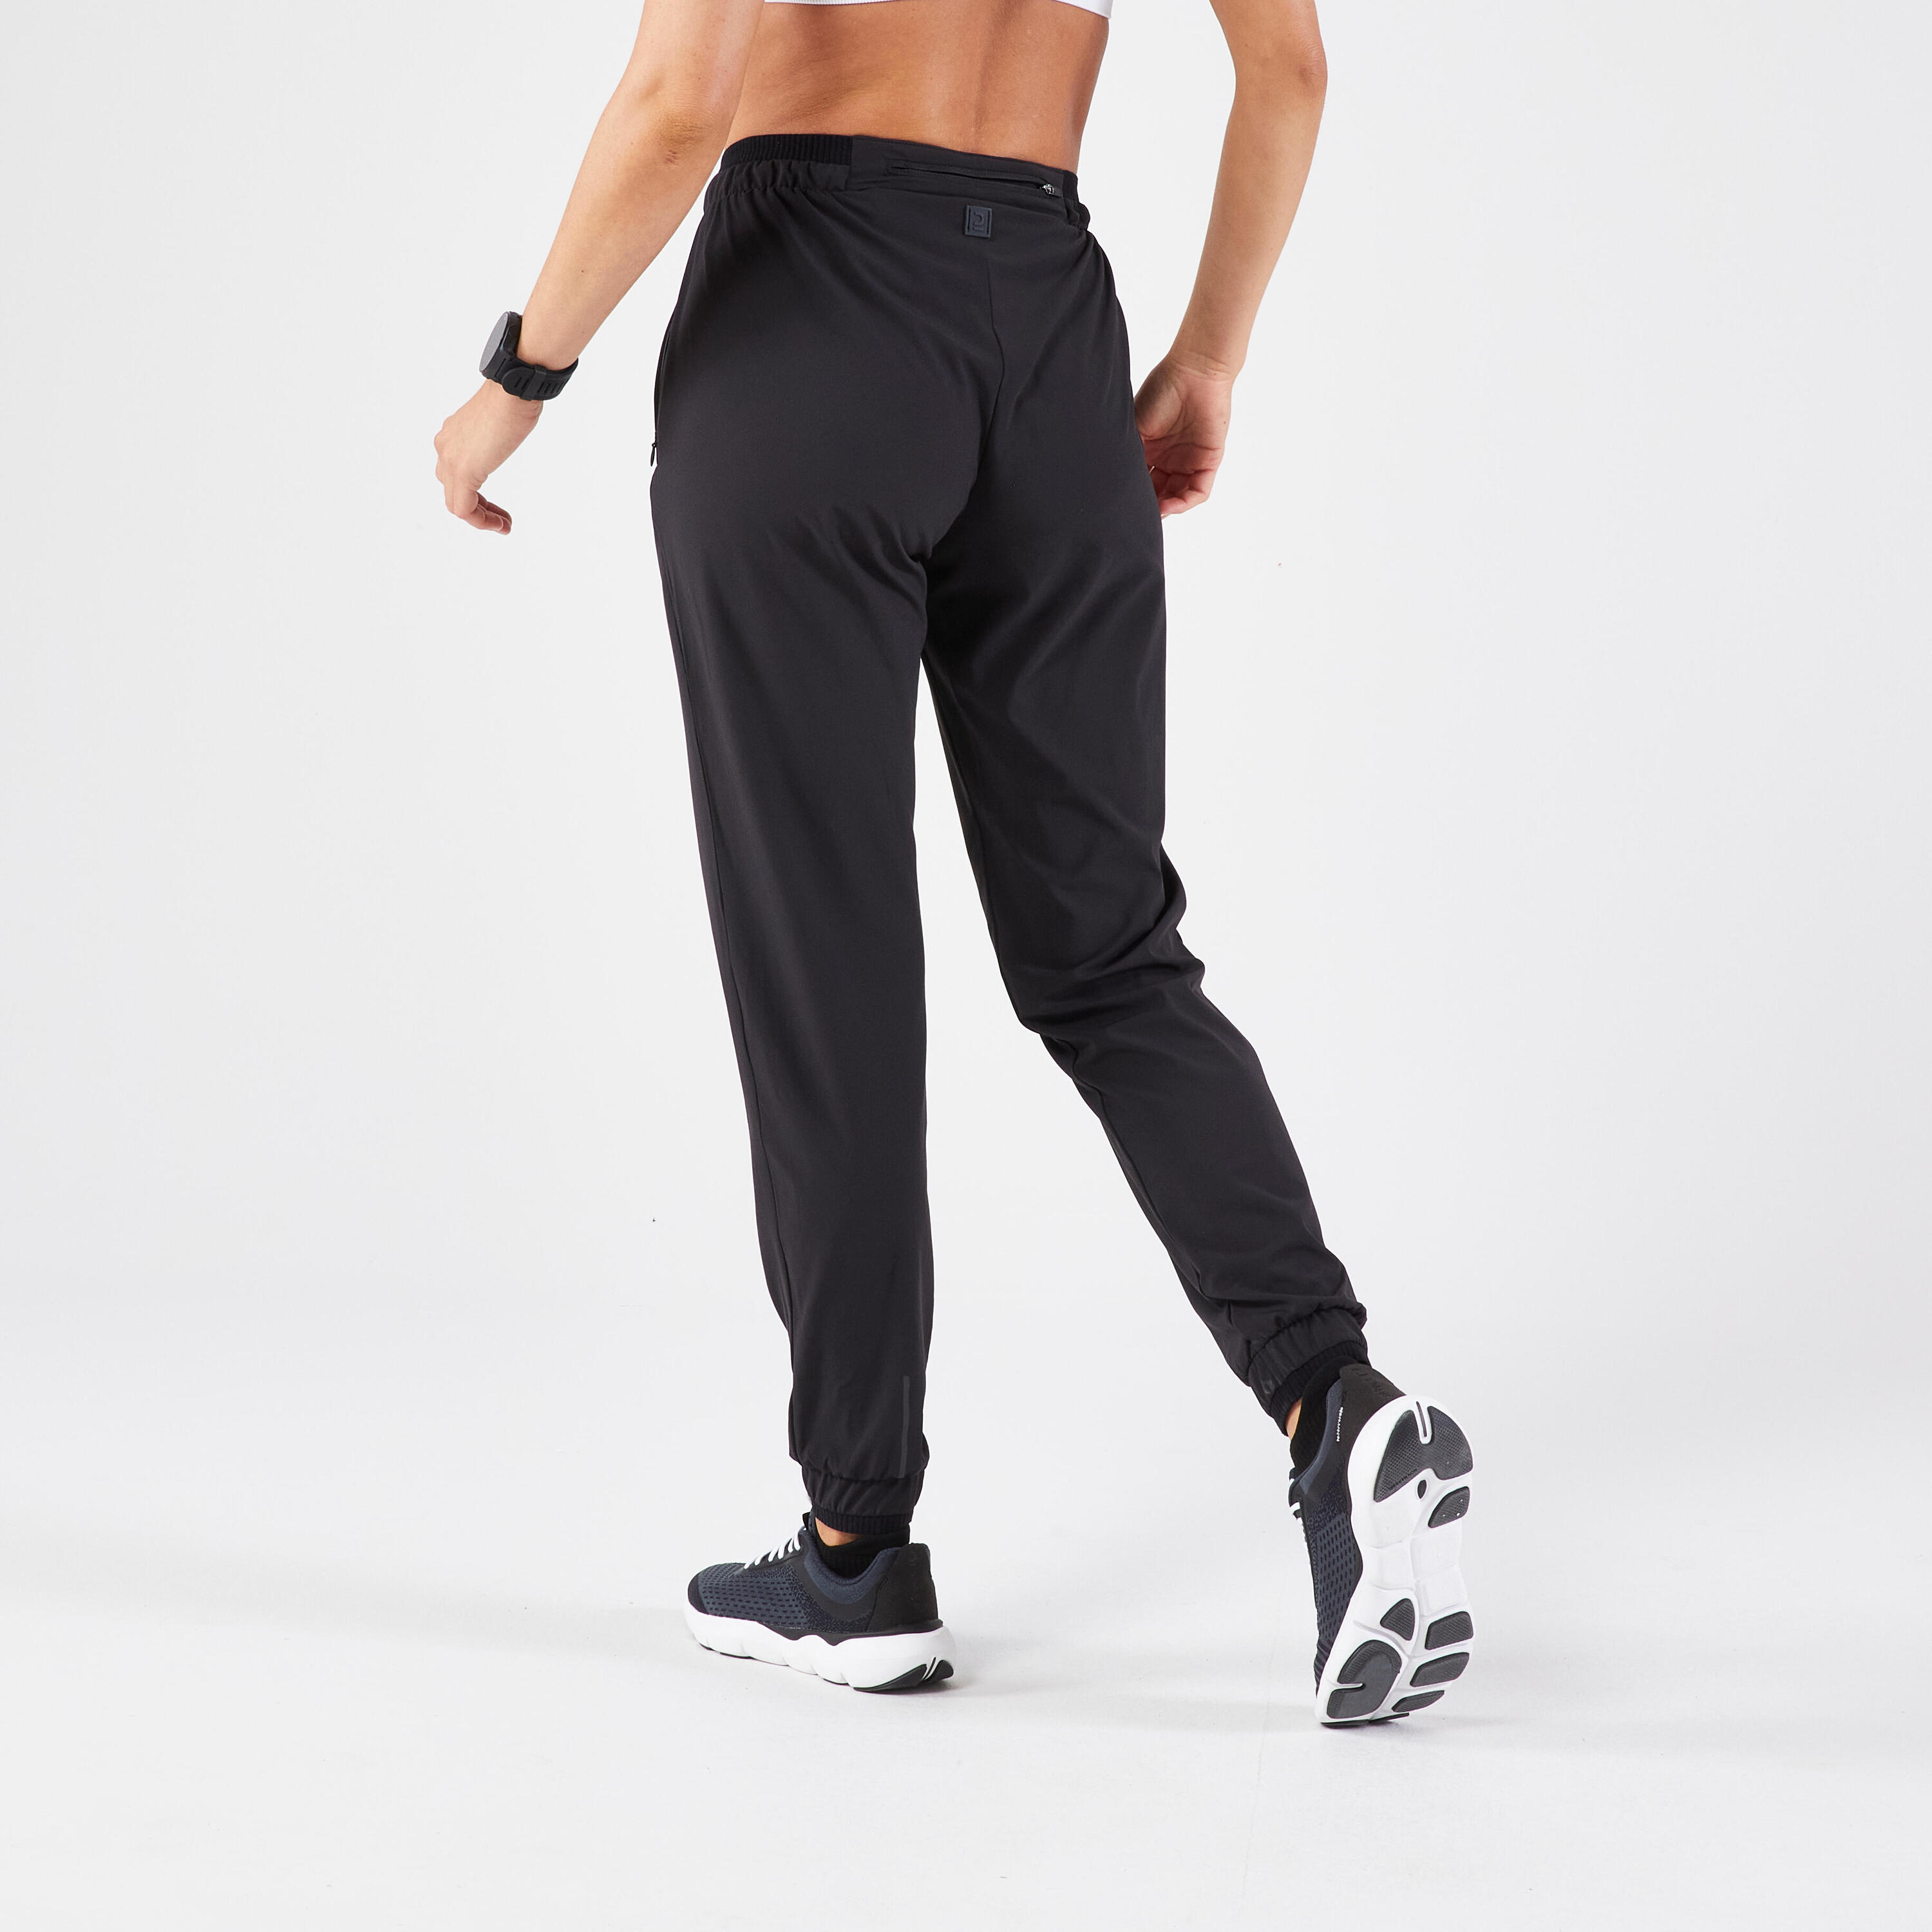 Women's Jogging Running Breathable Trousers Dry - black 5/7